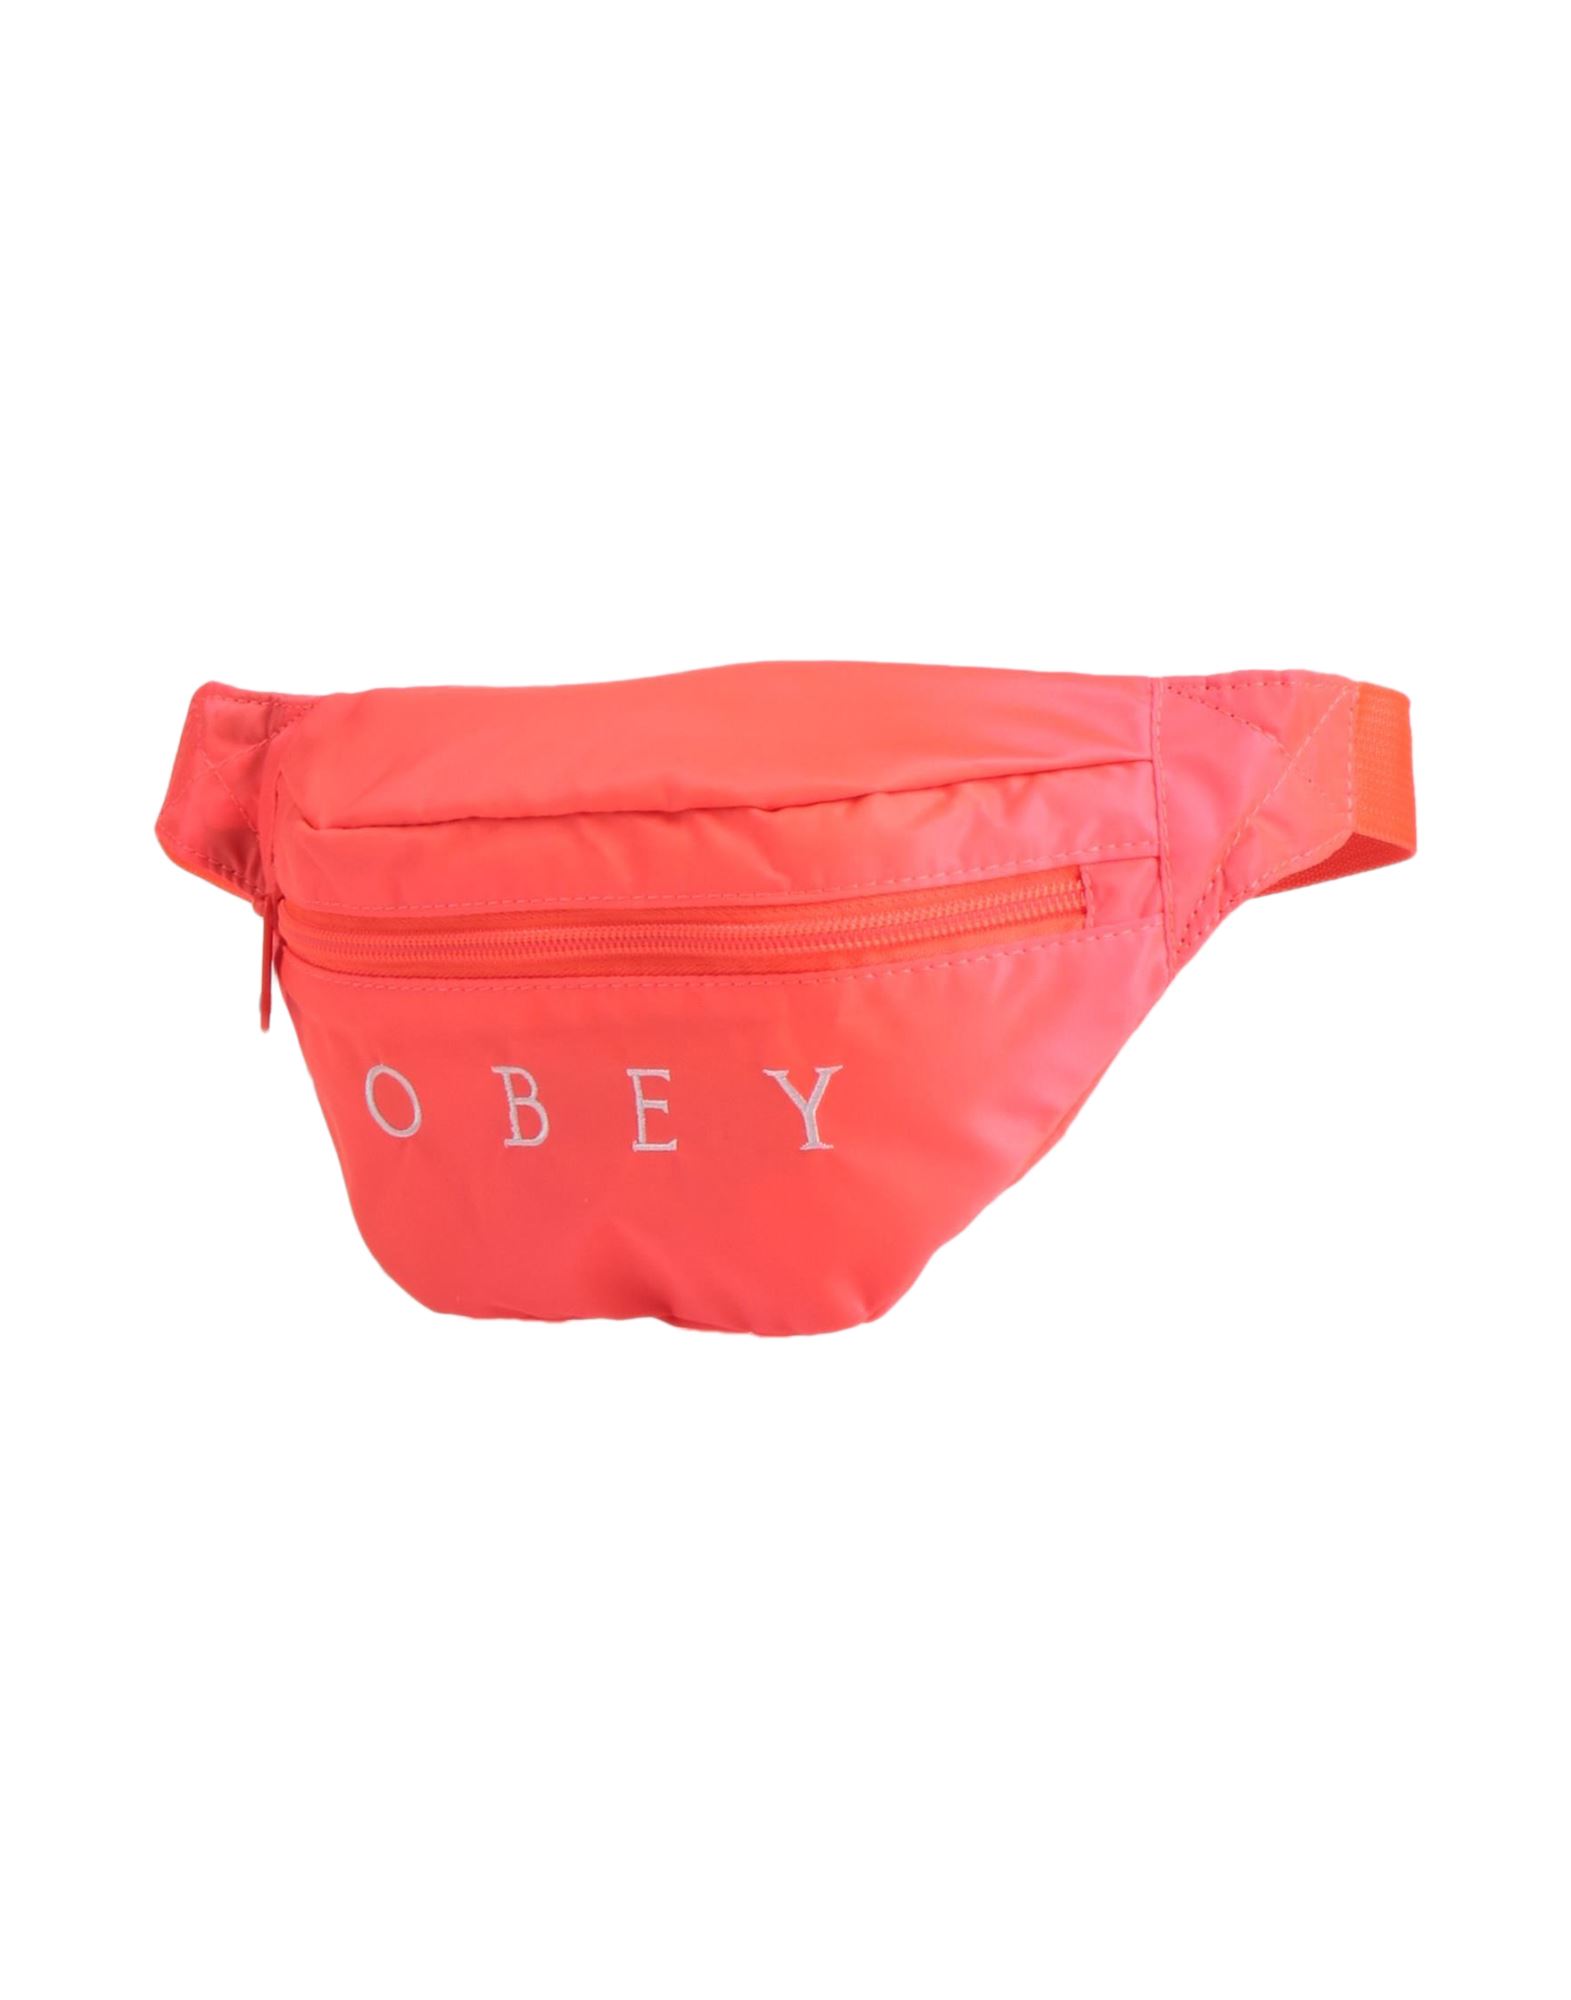 Obey Bum Bags In Coral